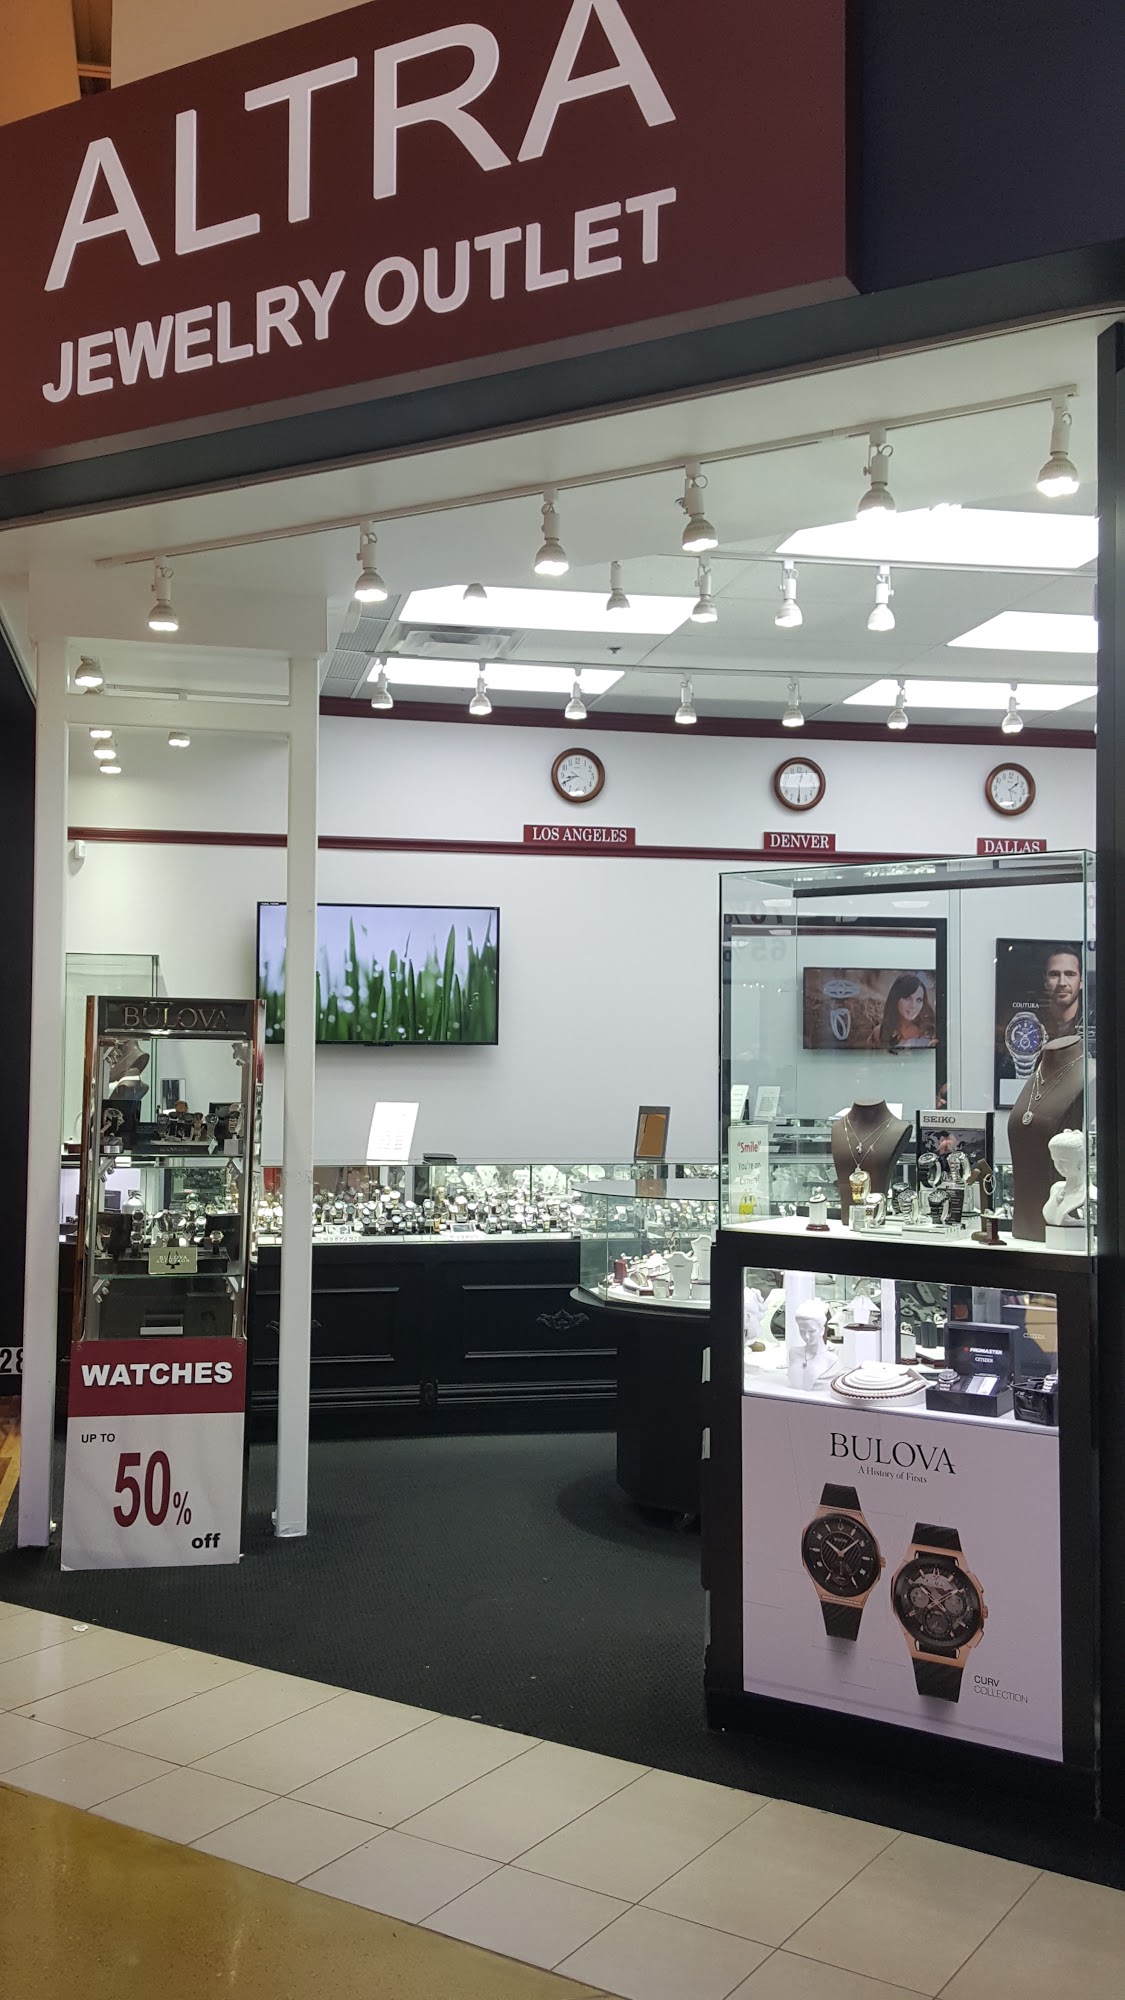 Altra Jewelry Outlet